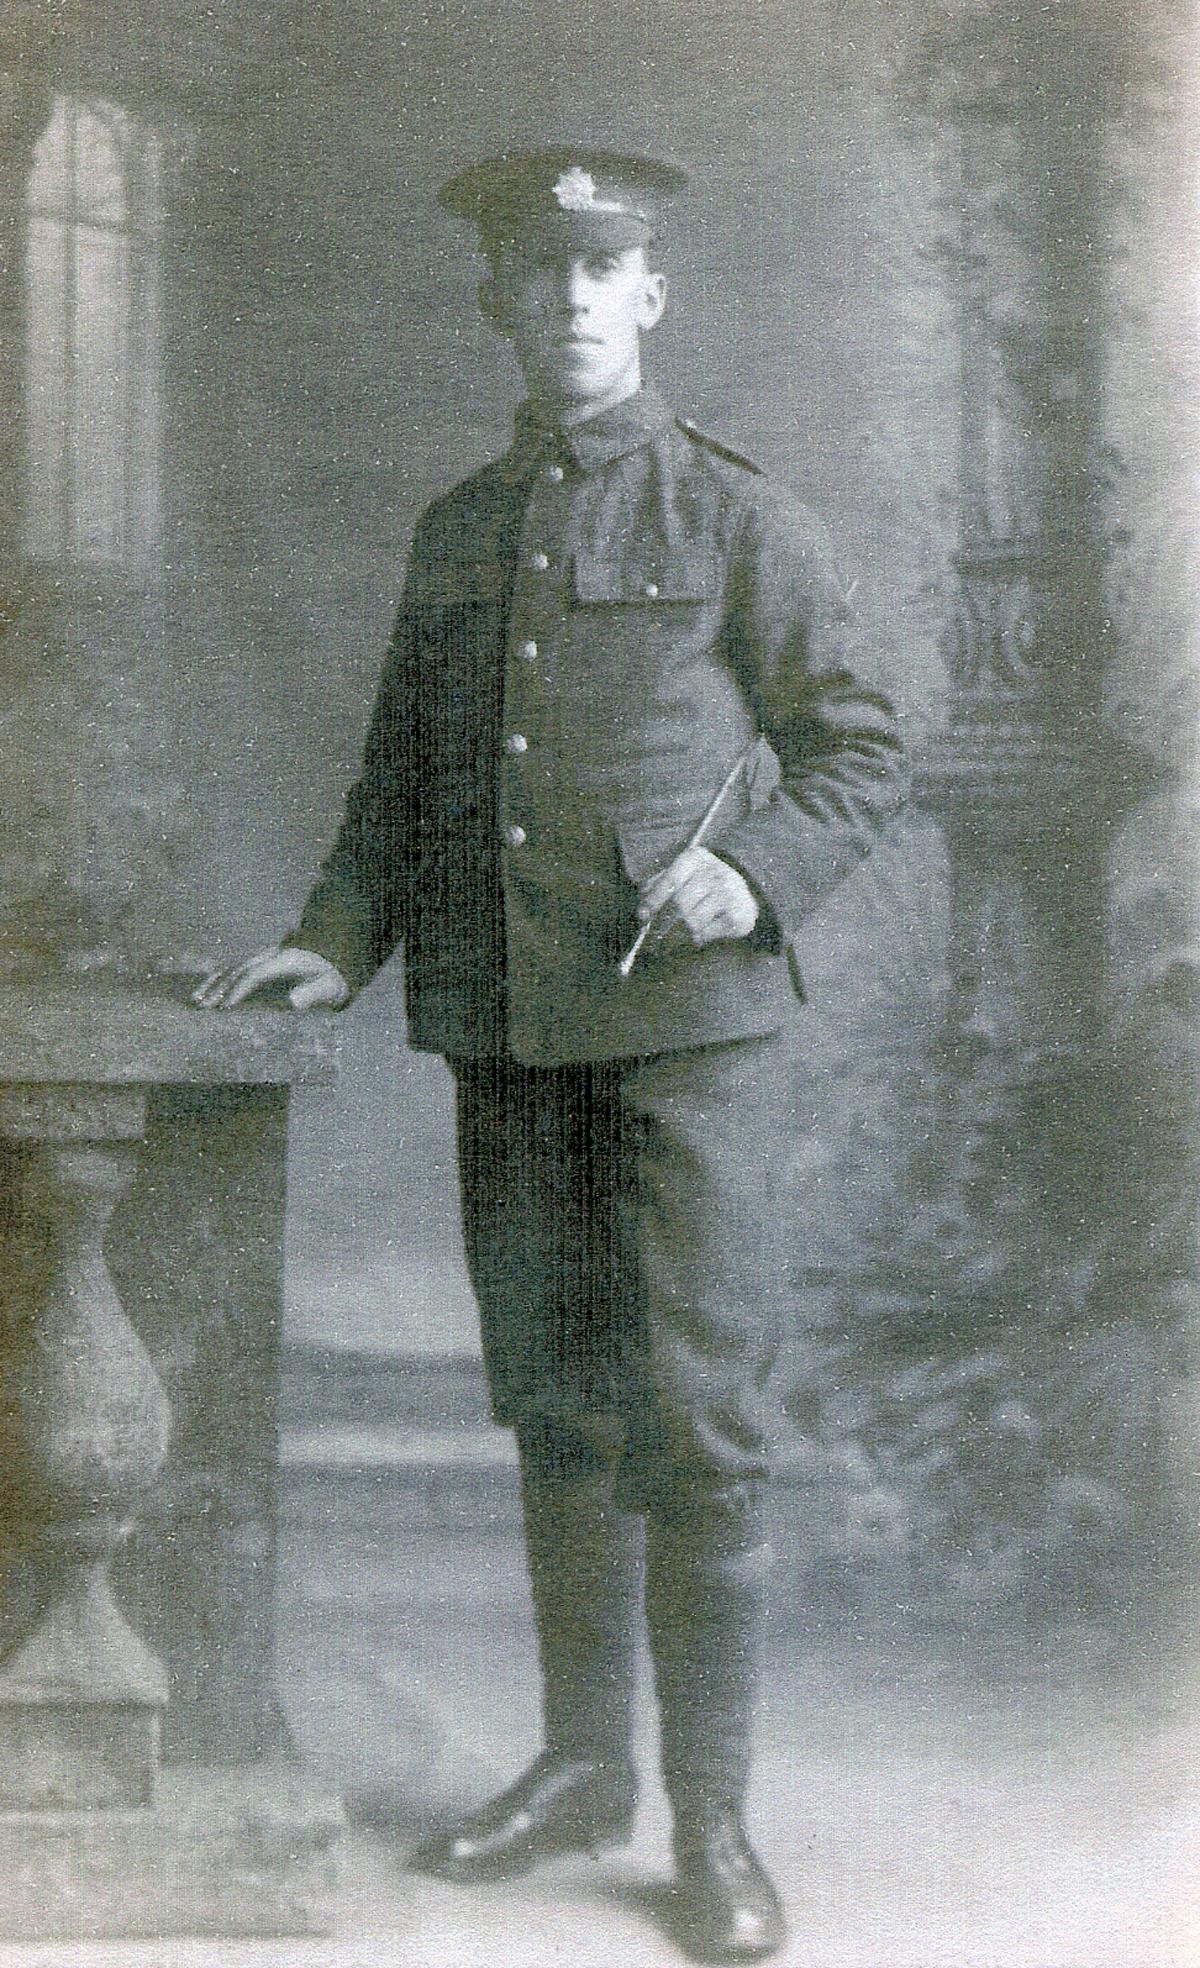 James 'Jim' Dawson, of Kendal, who served in a machine gun section throughout the war - and survived